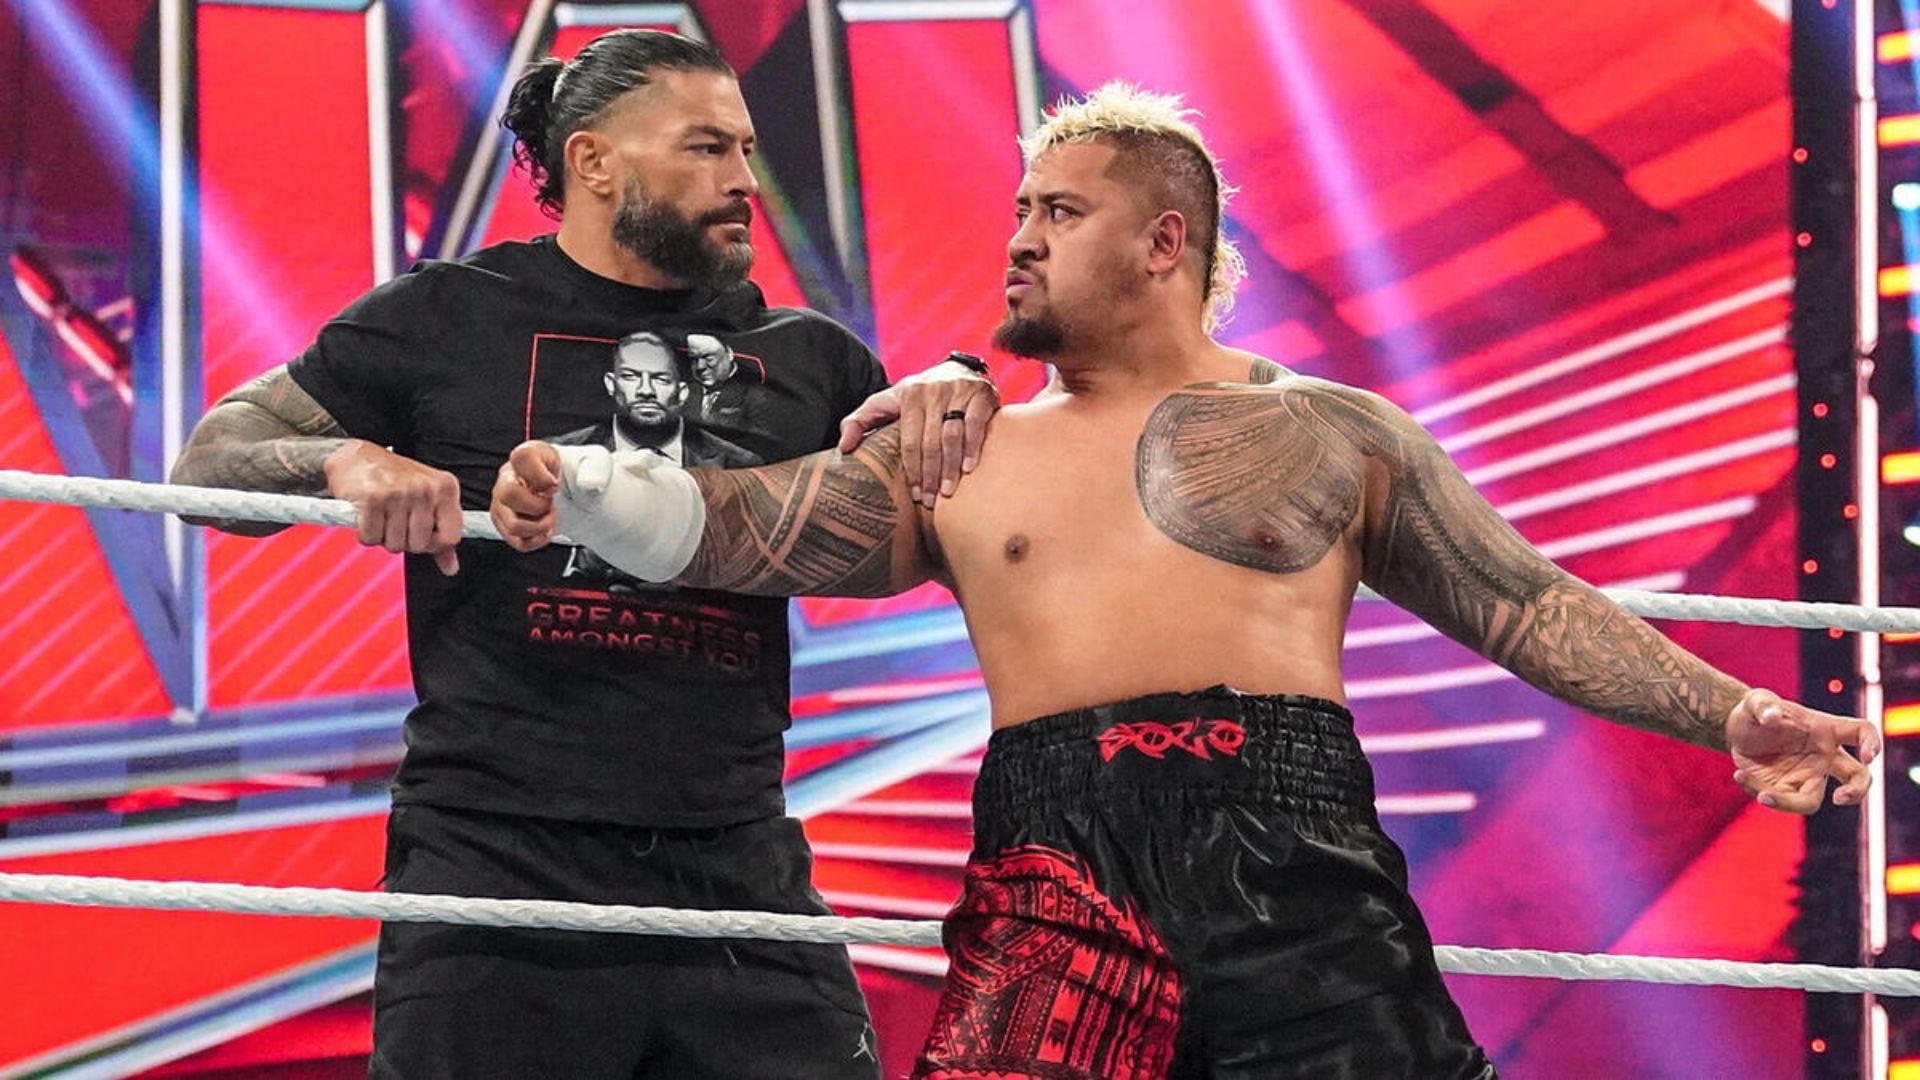 Roman Reigns and Solo Sikoa will be teaming up for the first time as a tag team.